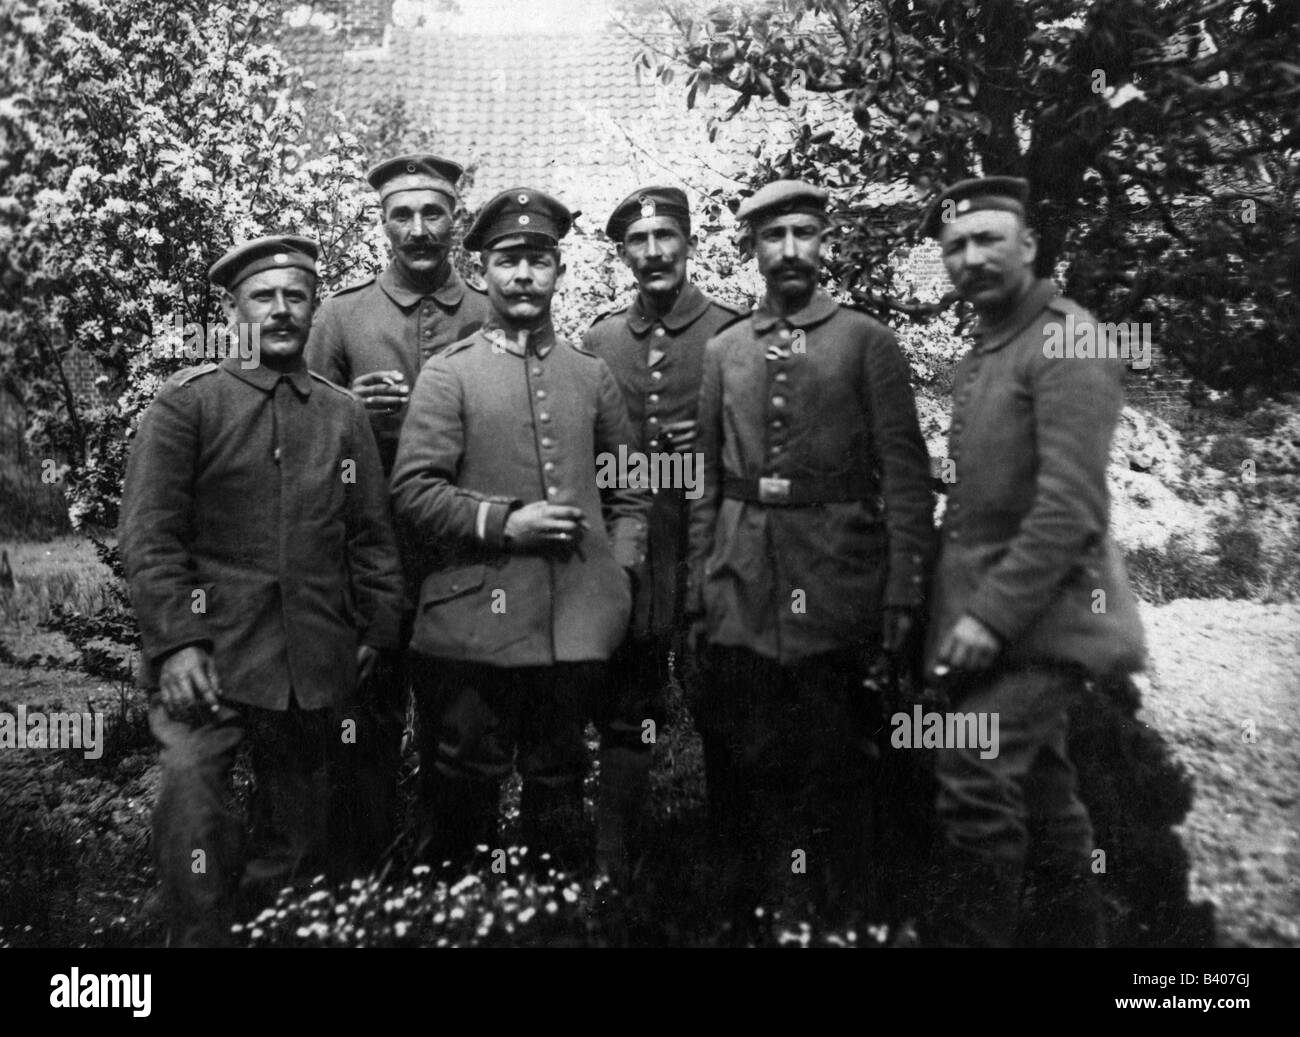 events, First World War / WWI, back area, 1st company / Bavarian Reserve Infantery Regiment No. 1, photo postcard, Germany, 1917, NCO, corporal, postcards, military, 20th century, uniform, peaked cap, caps, Bavaria, historic, historical, people, 1910s, Stock Photo